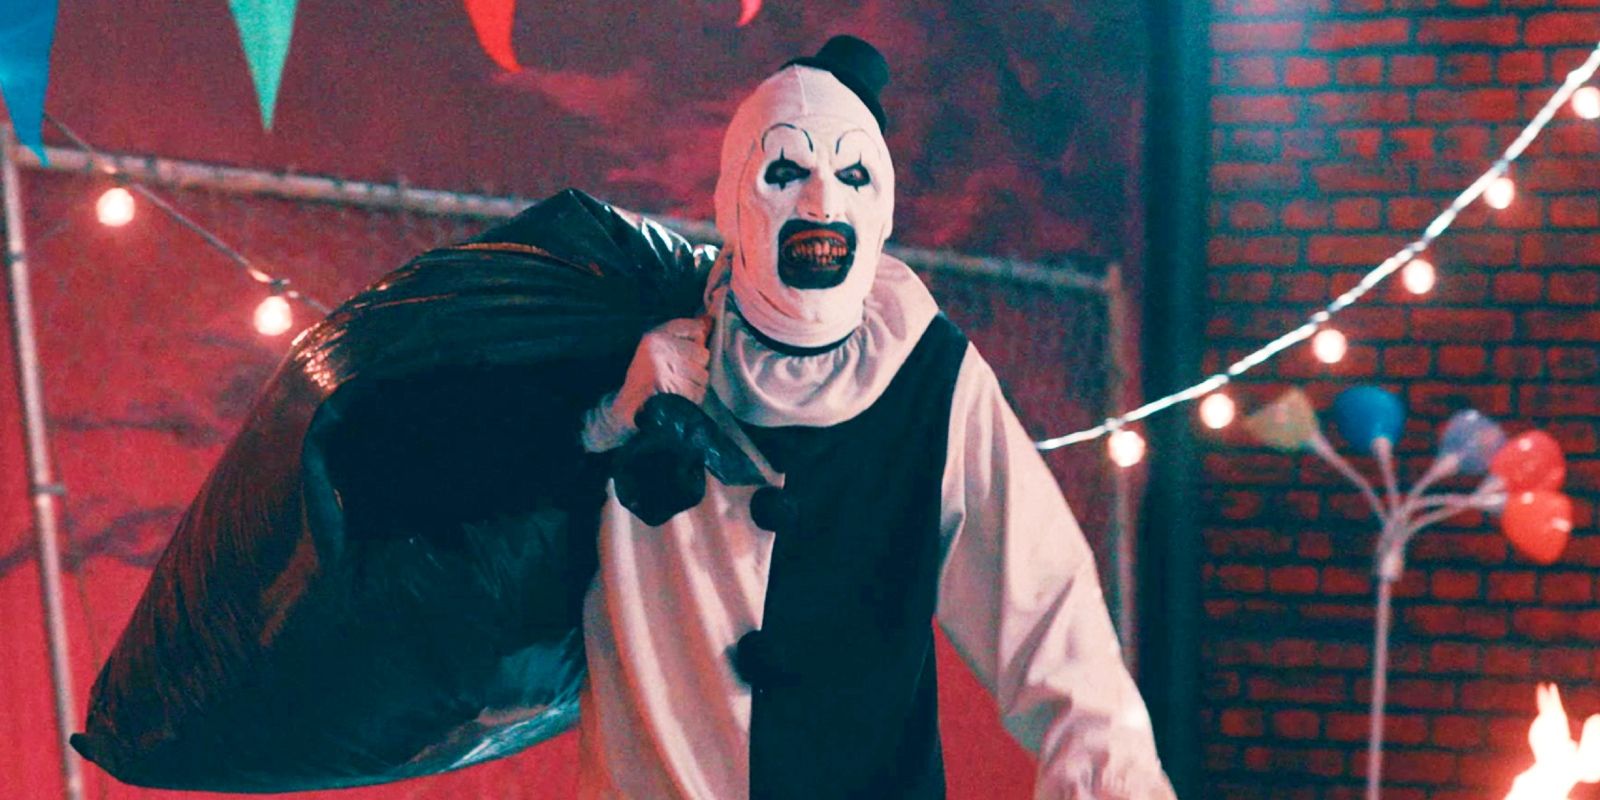 Terrifier 3 Director Teases “The Most Insanely Horrific Scenes” & Someone On Set Couldn’t Handle It